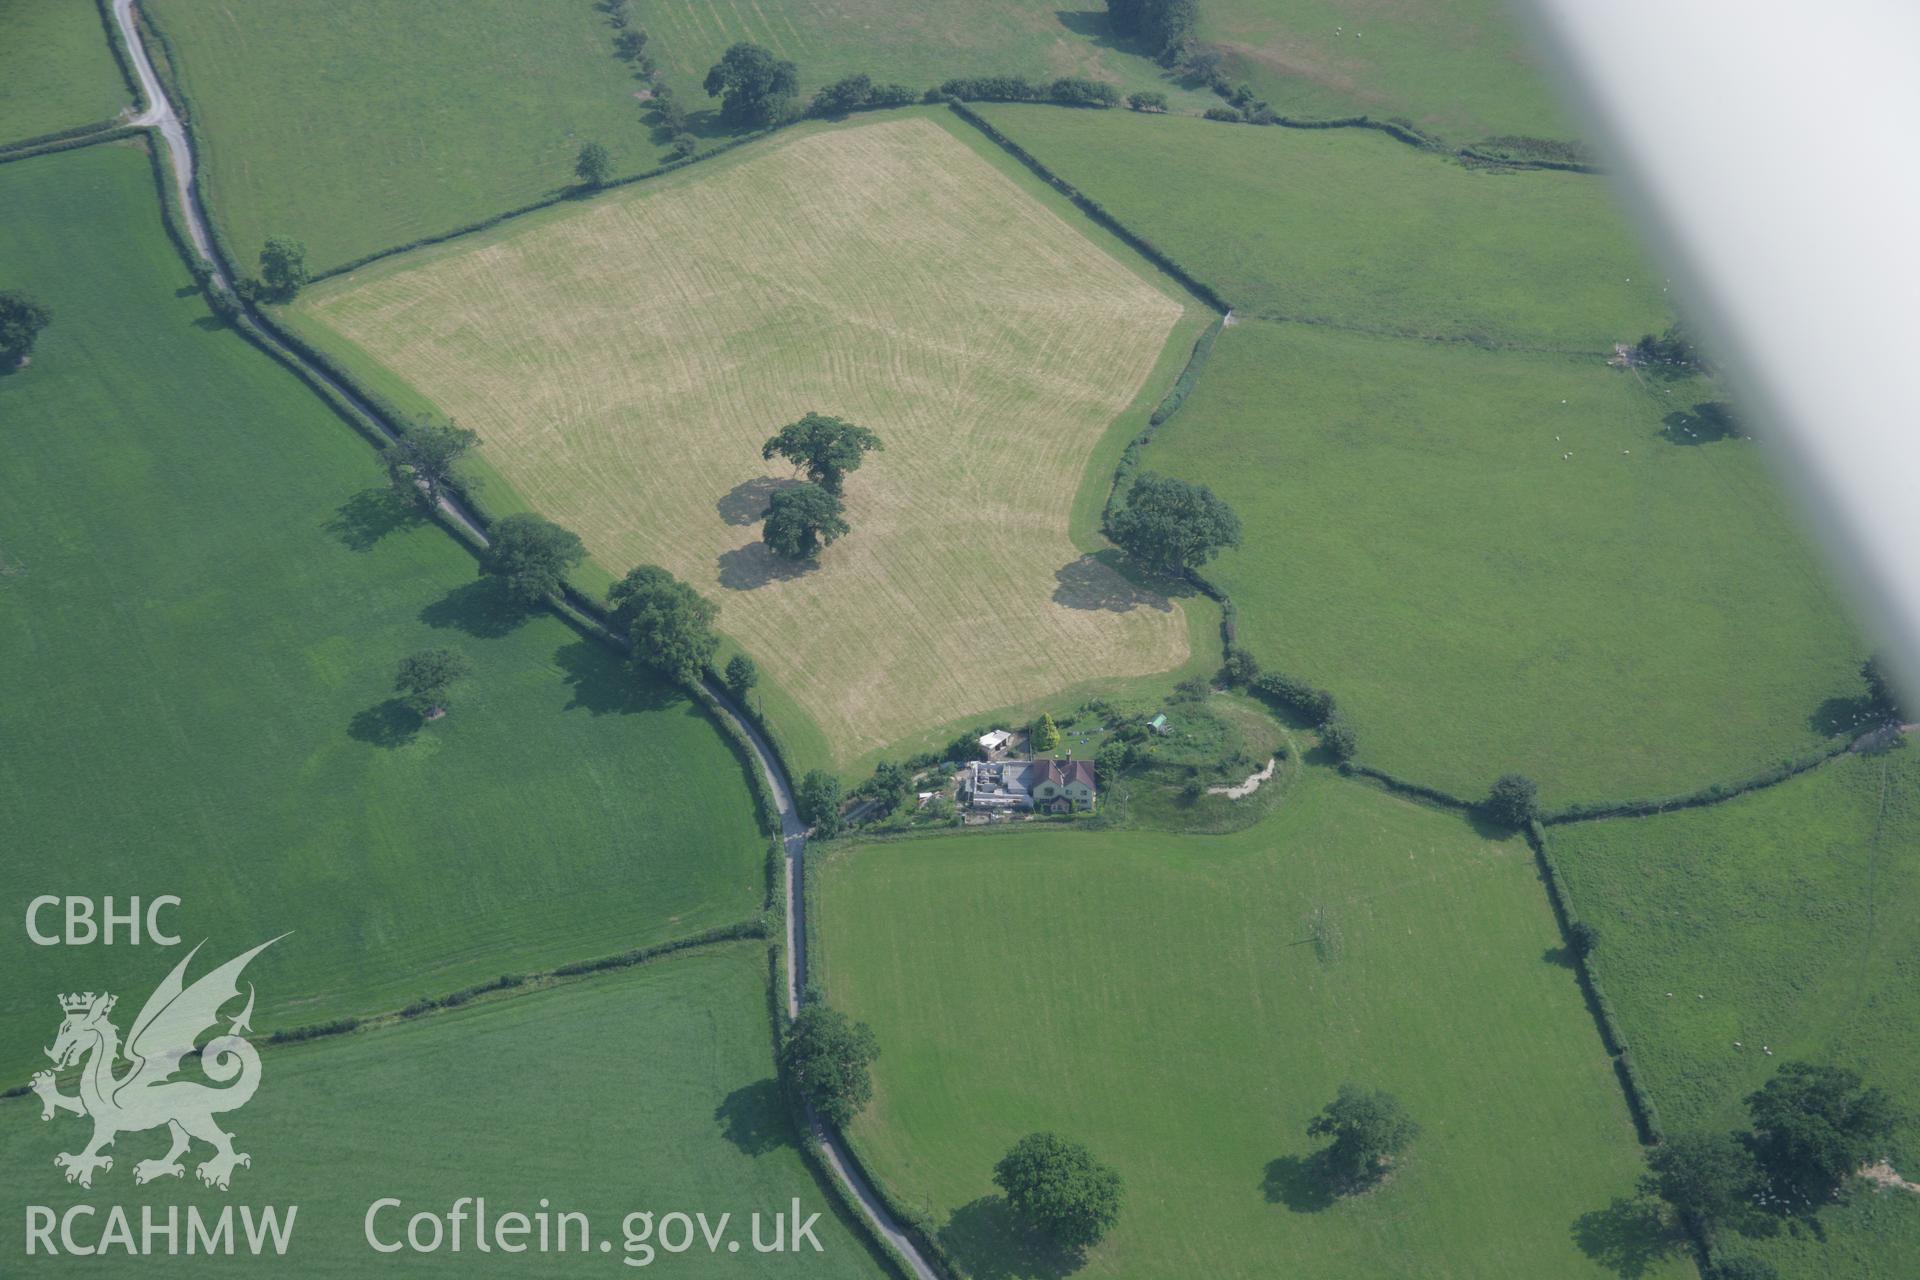 RCAHMW colour oblique aerial photograph of Tomen-Cefn Glaniwrch Motte. Taken on 04 July 2006 by Toby Driver.